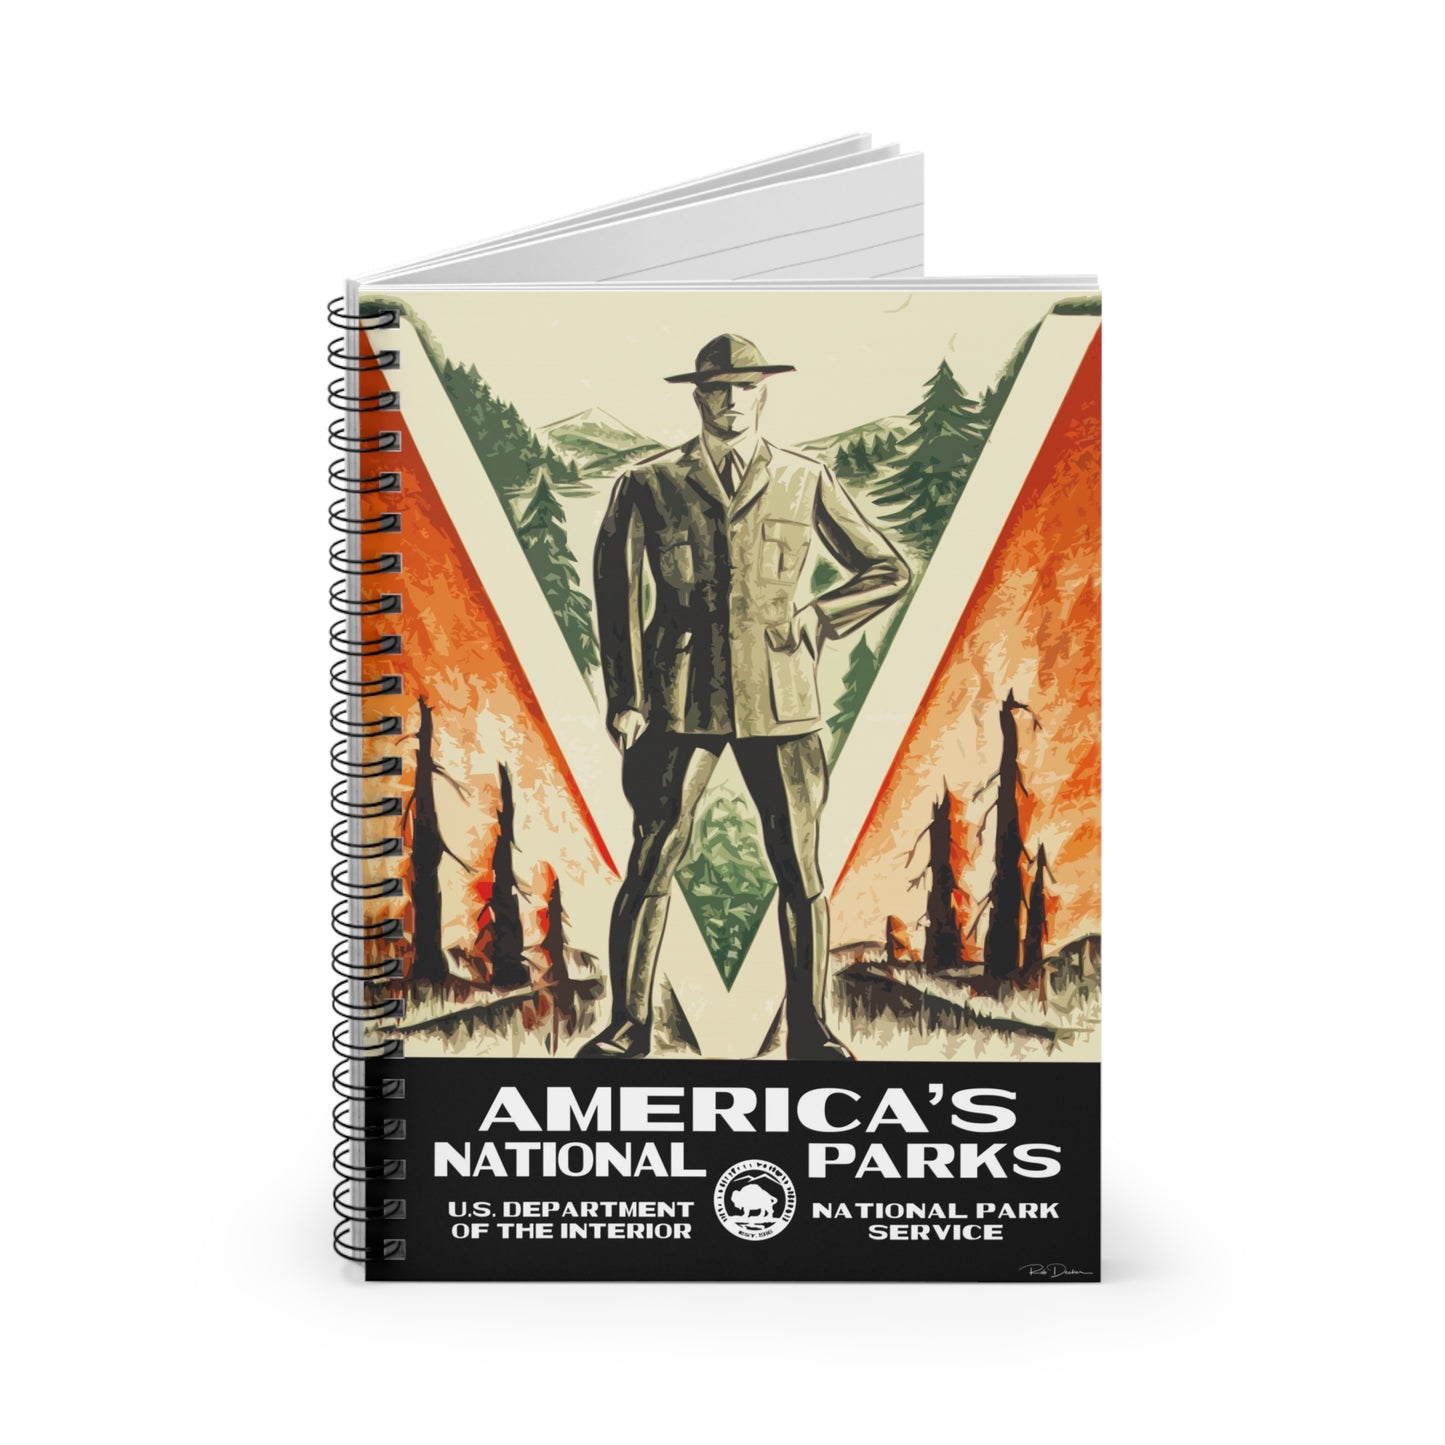 America's National Parks,  Worth Protecting (Male Ranger) Field Journal